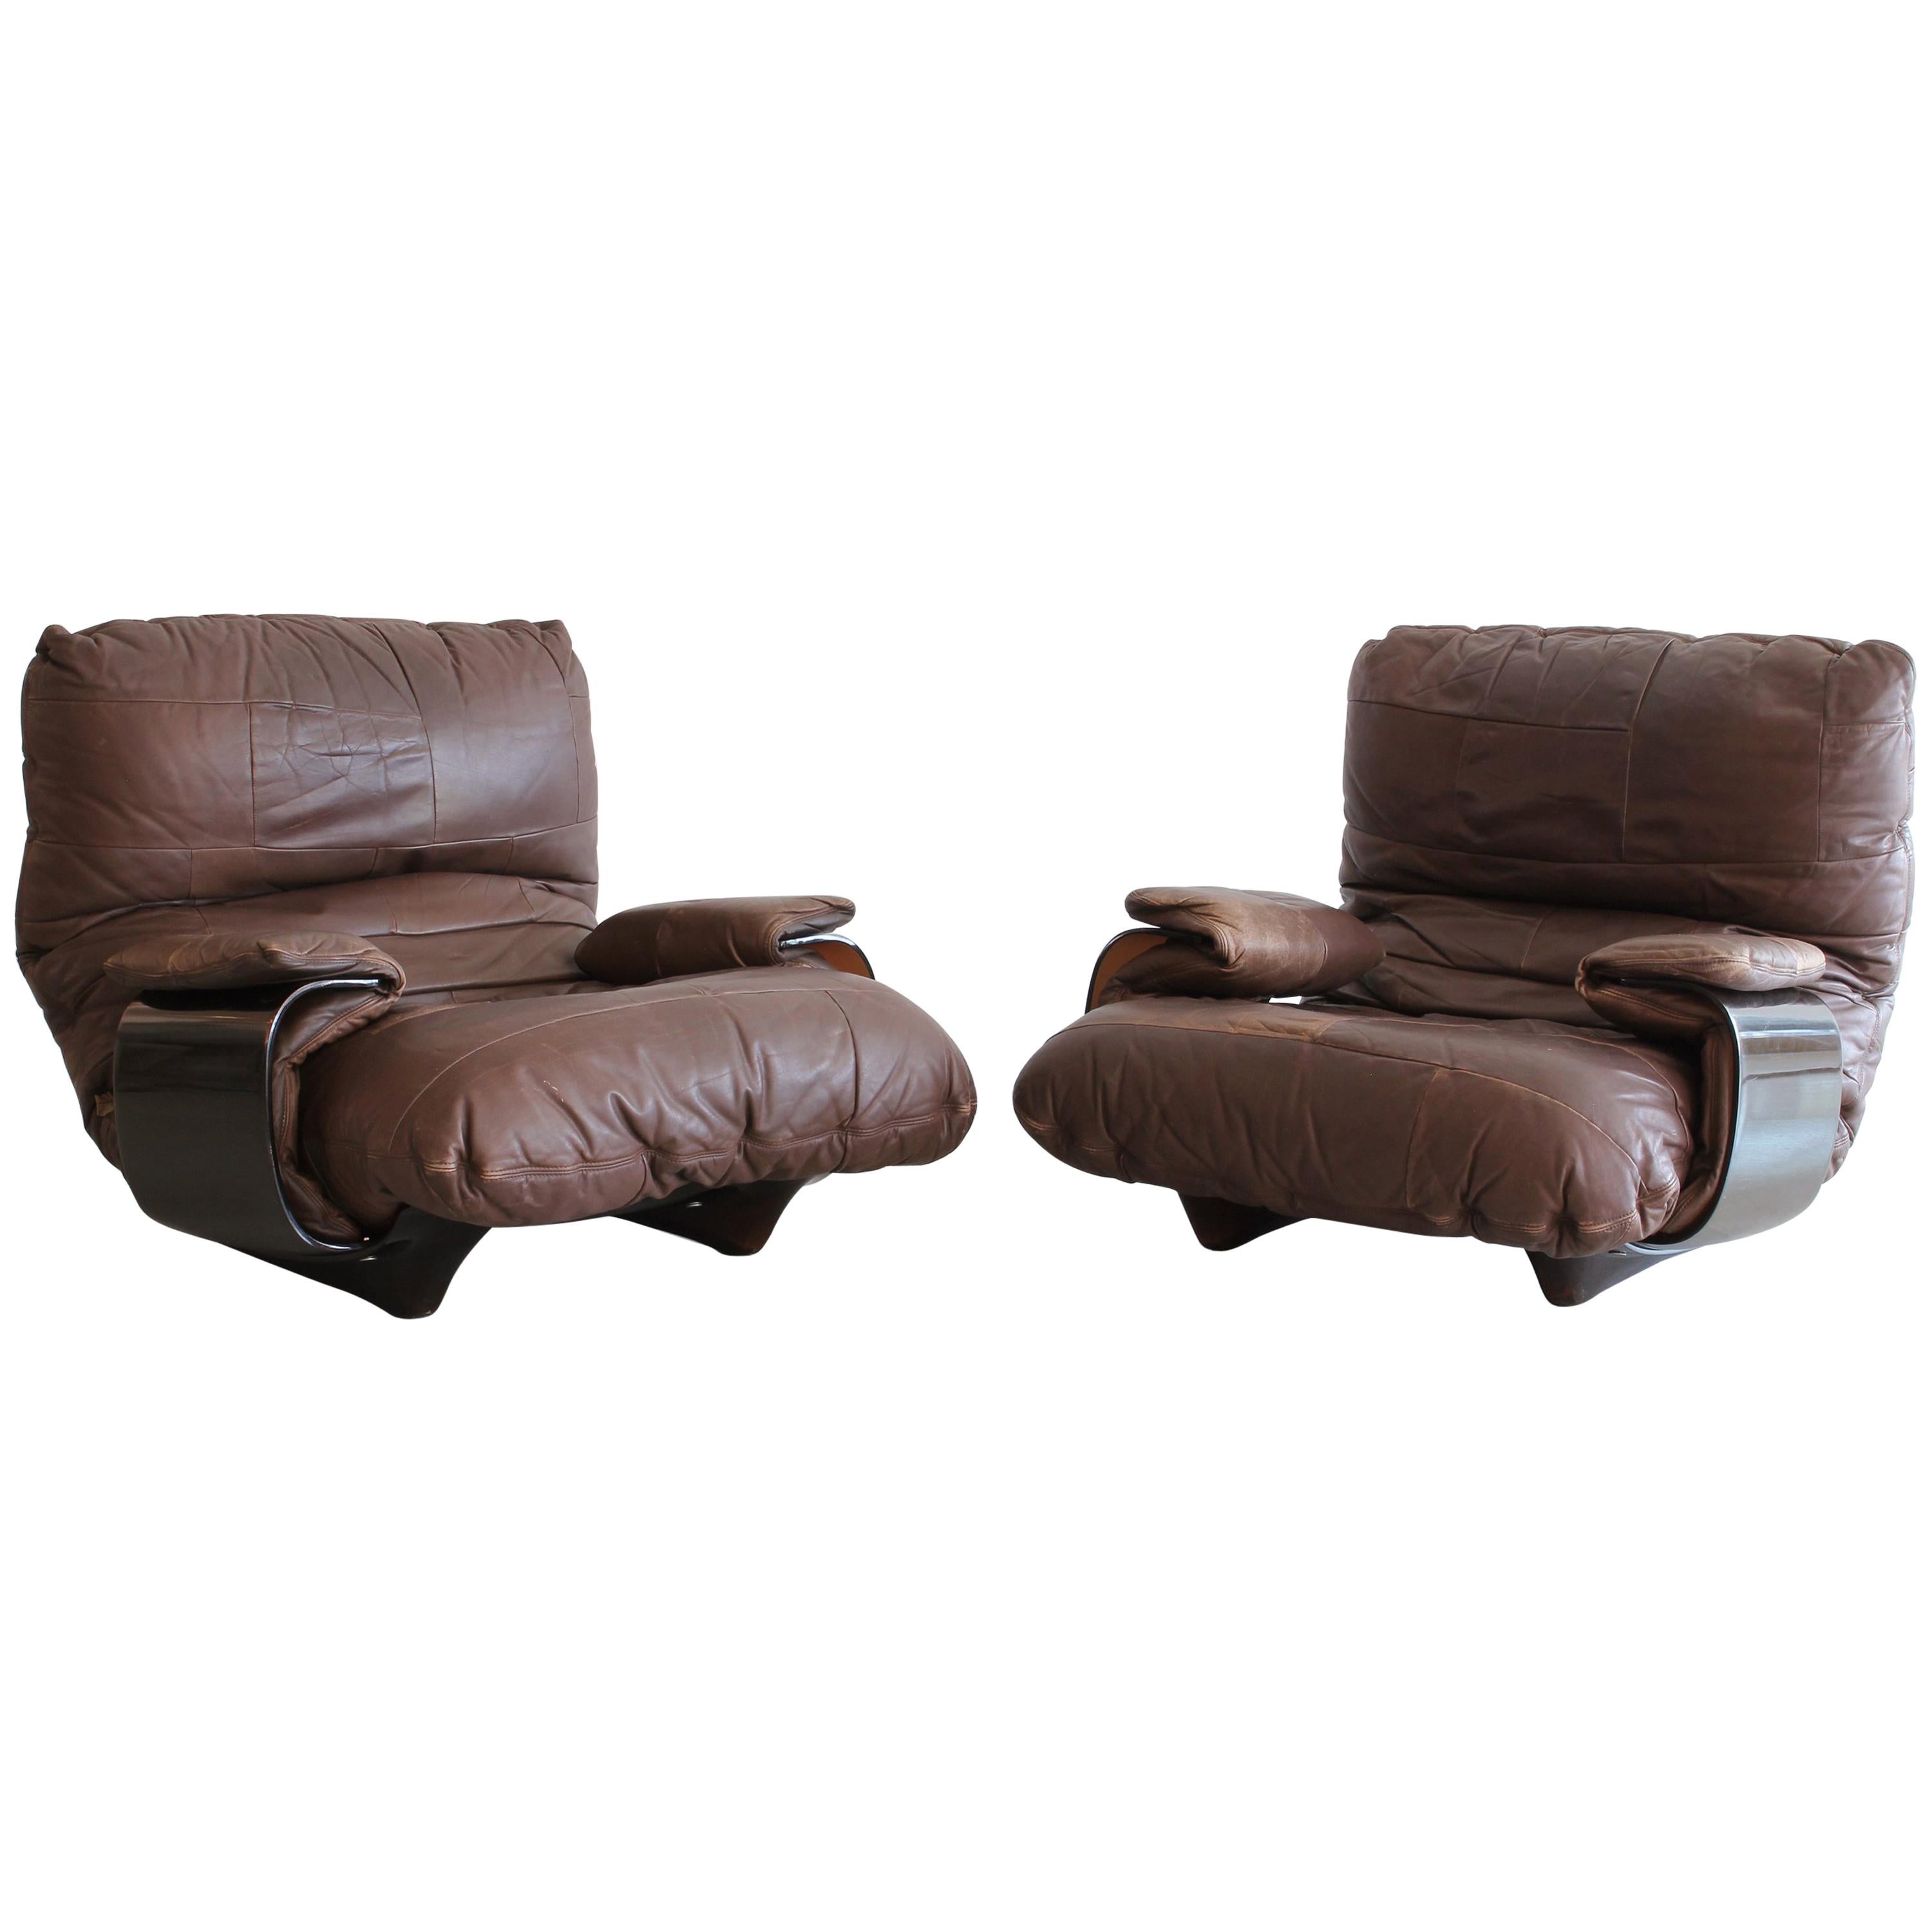 Pair of Marsala Lounge Chairs by Michel Ducaroy for Ligne Roset